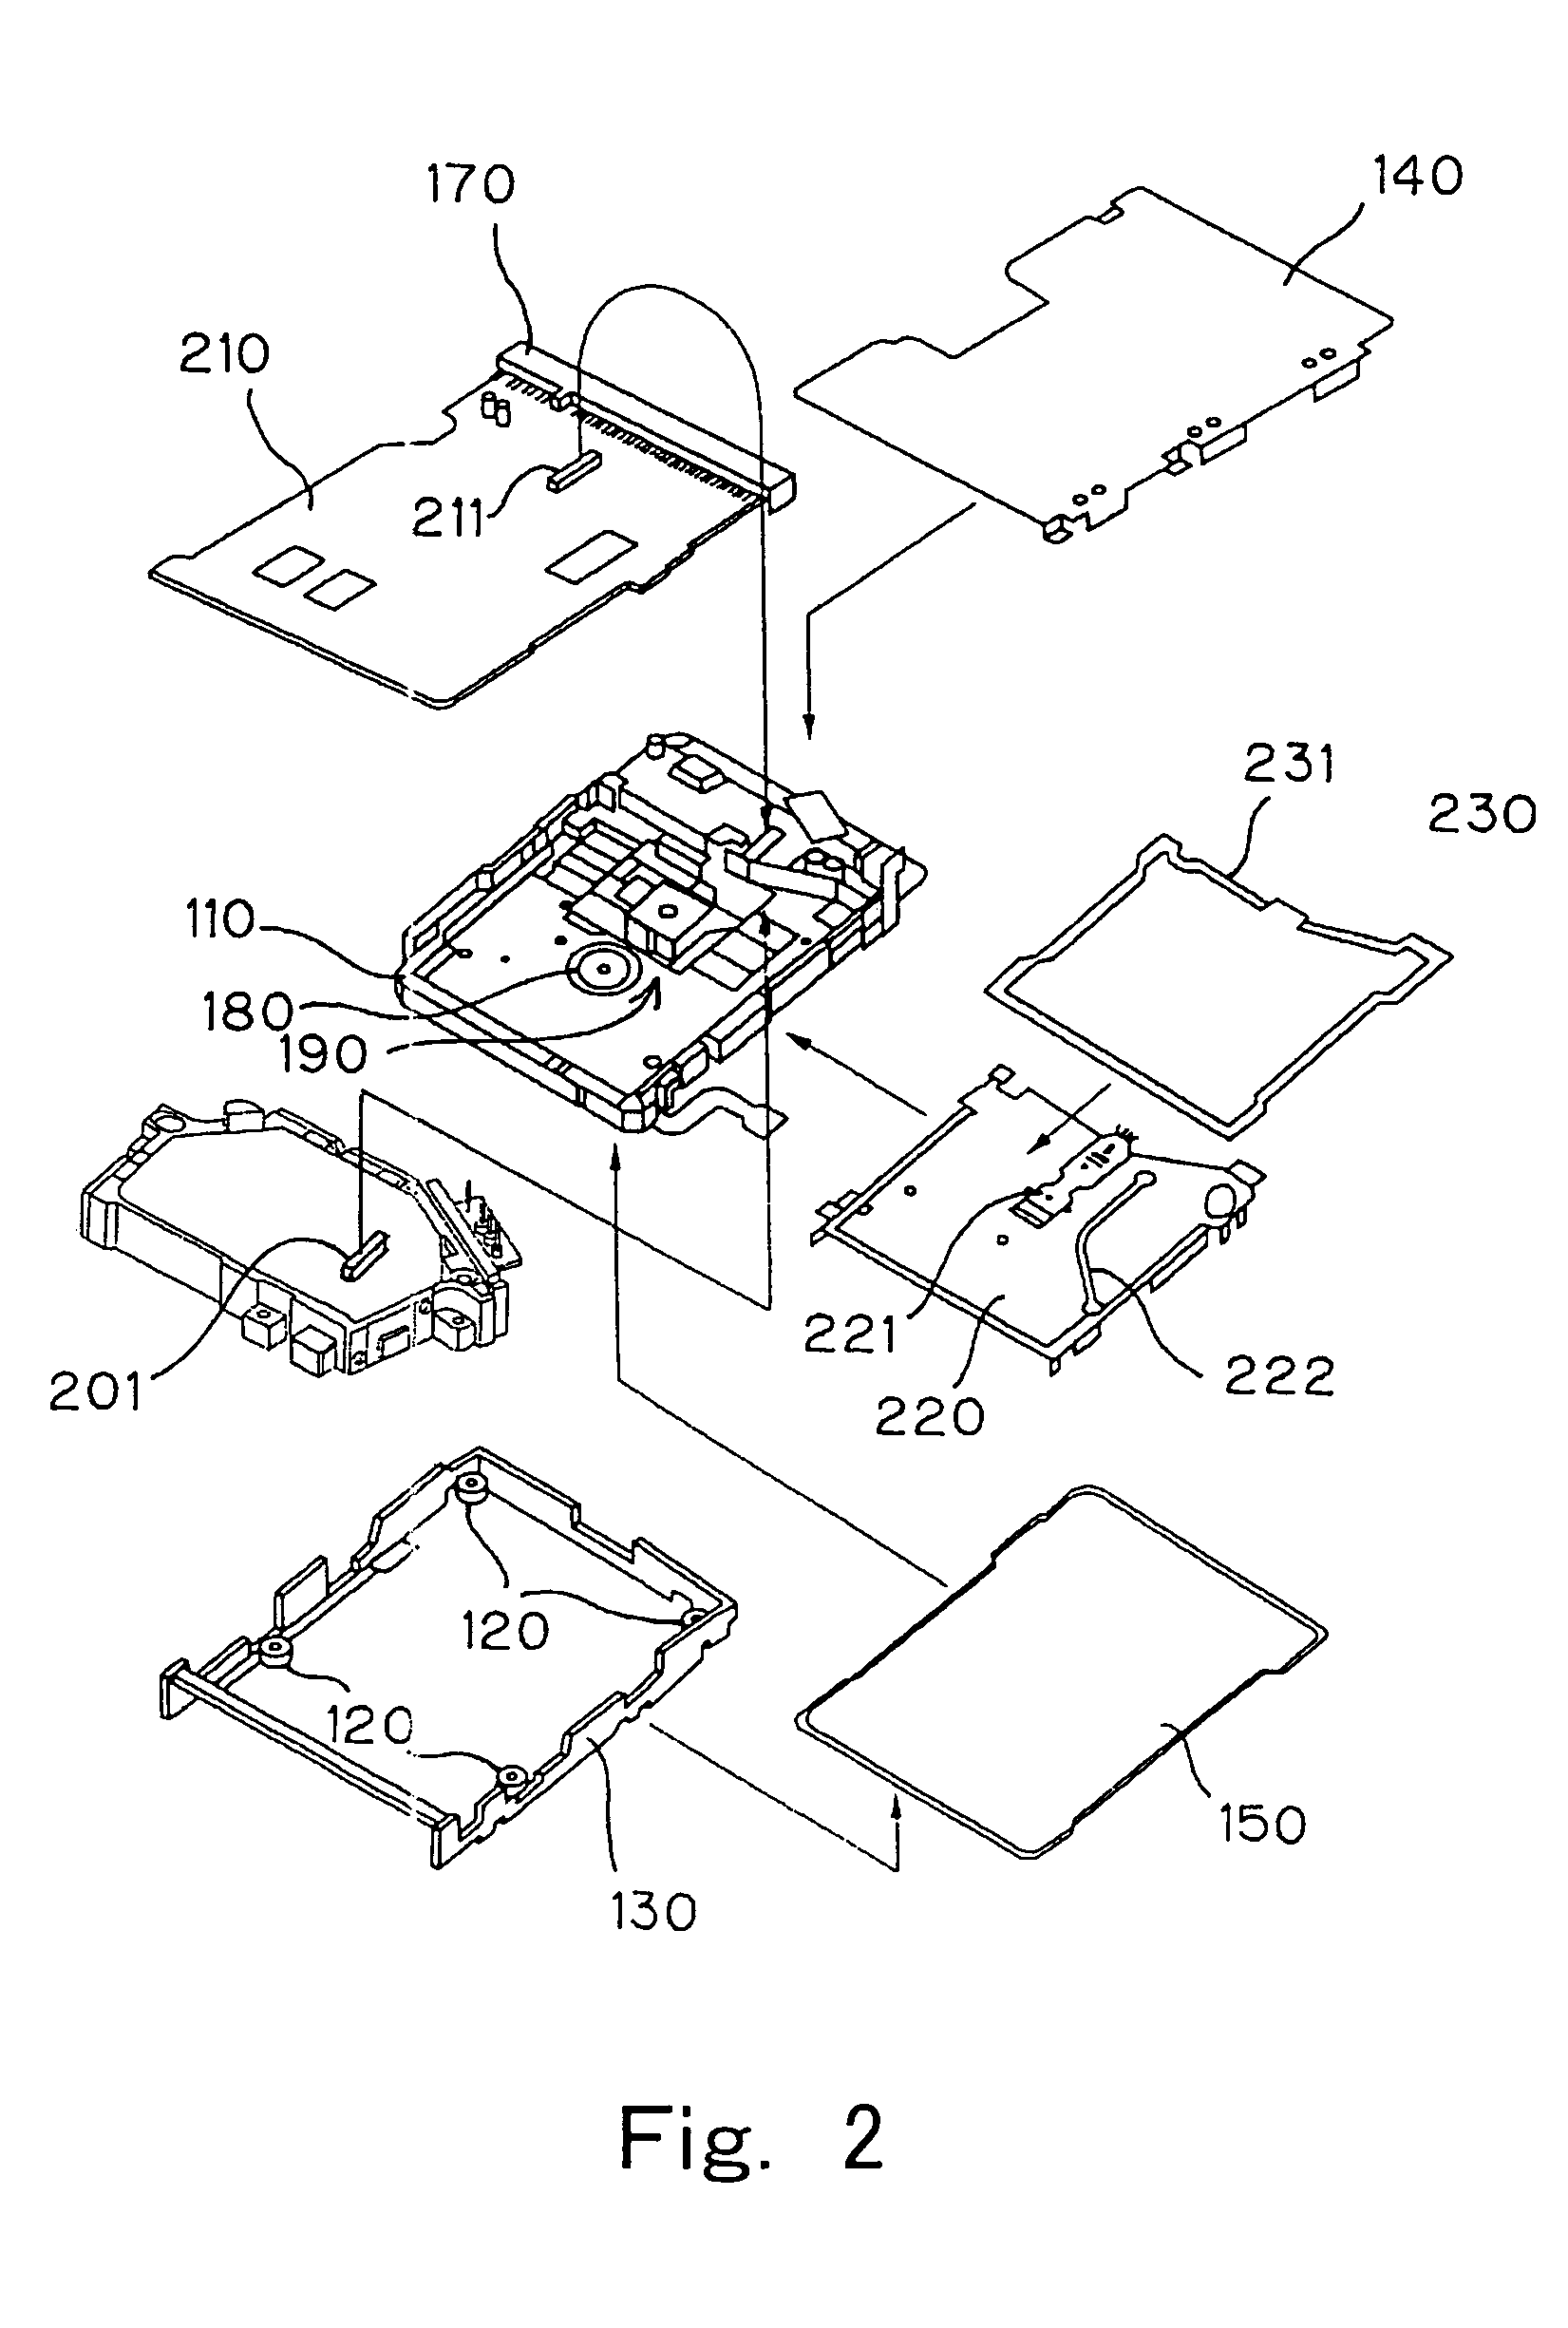 Collimator optical system and optical information storage device